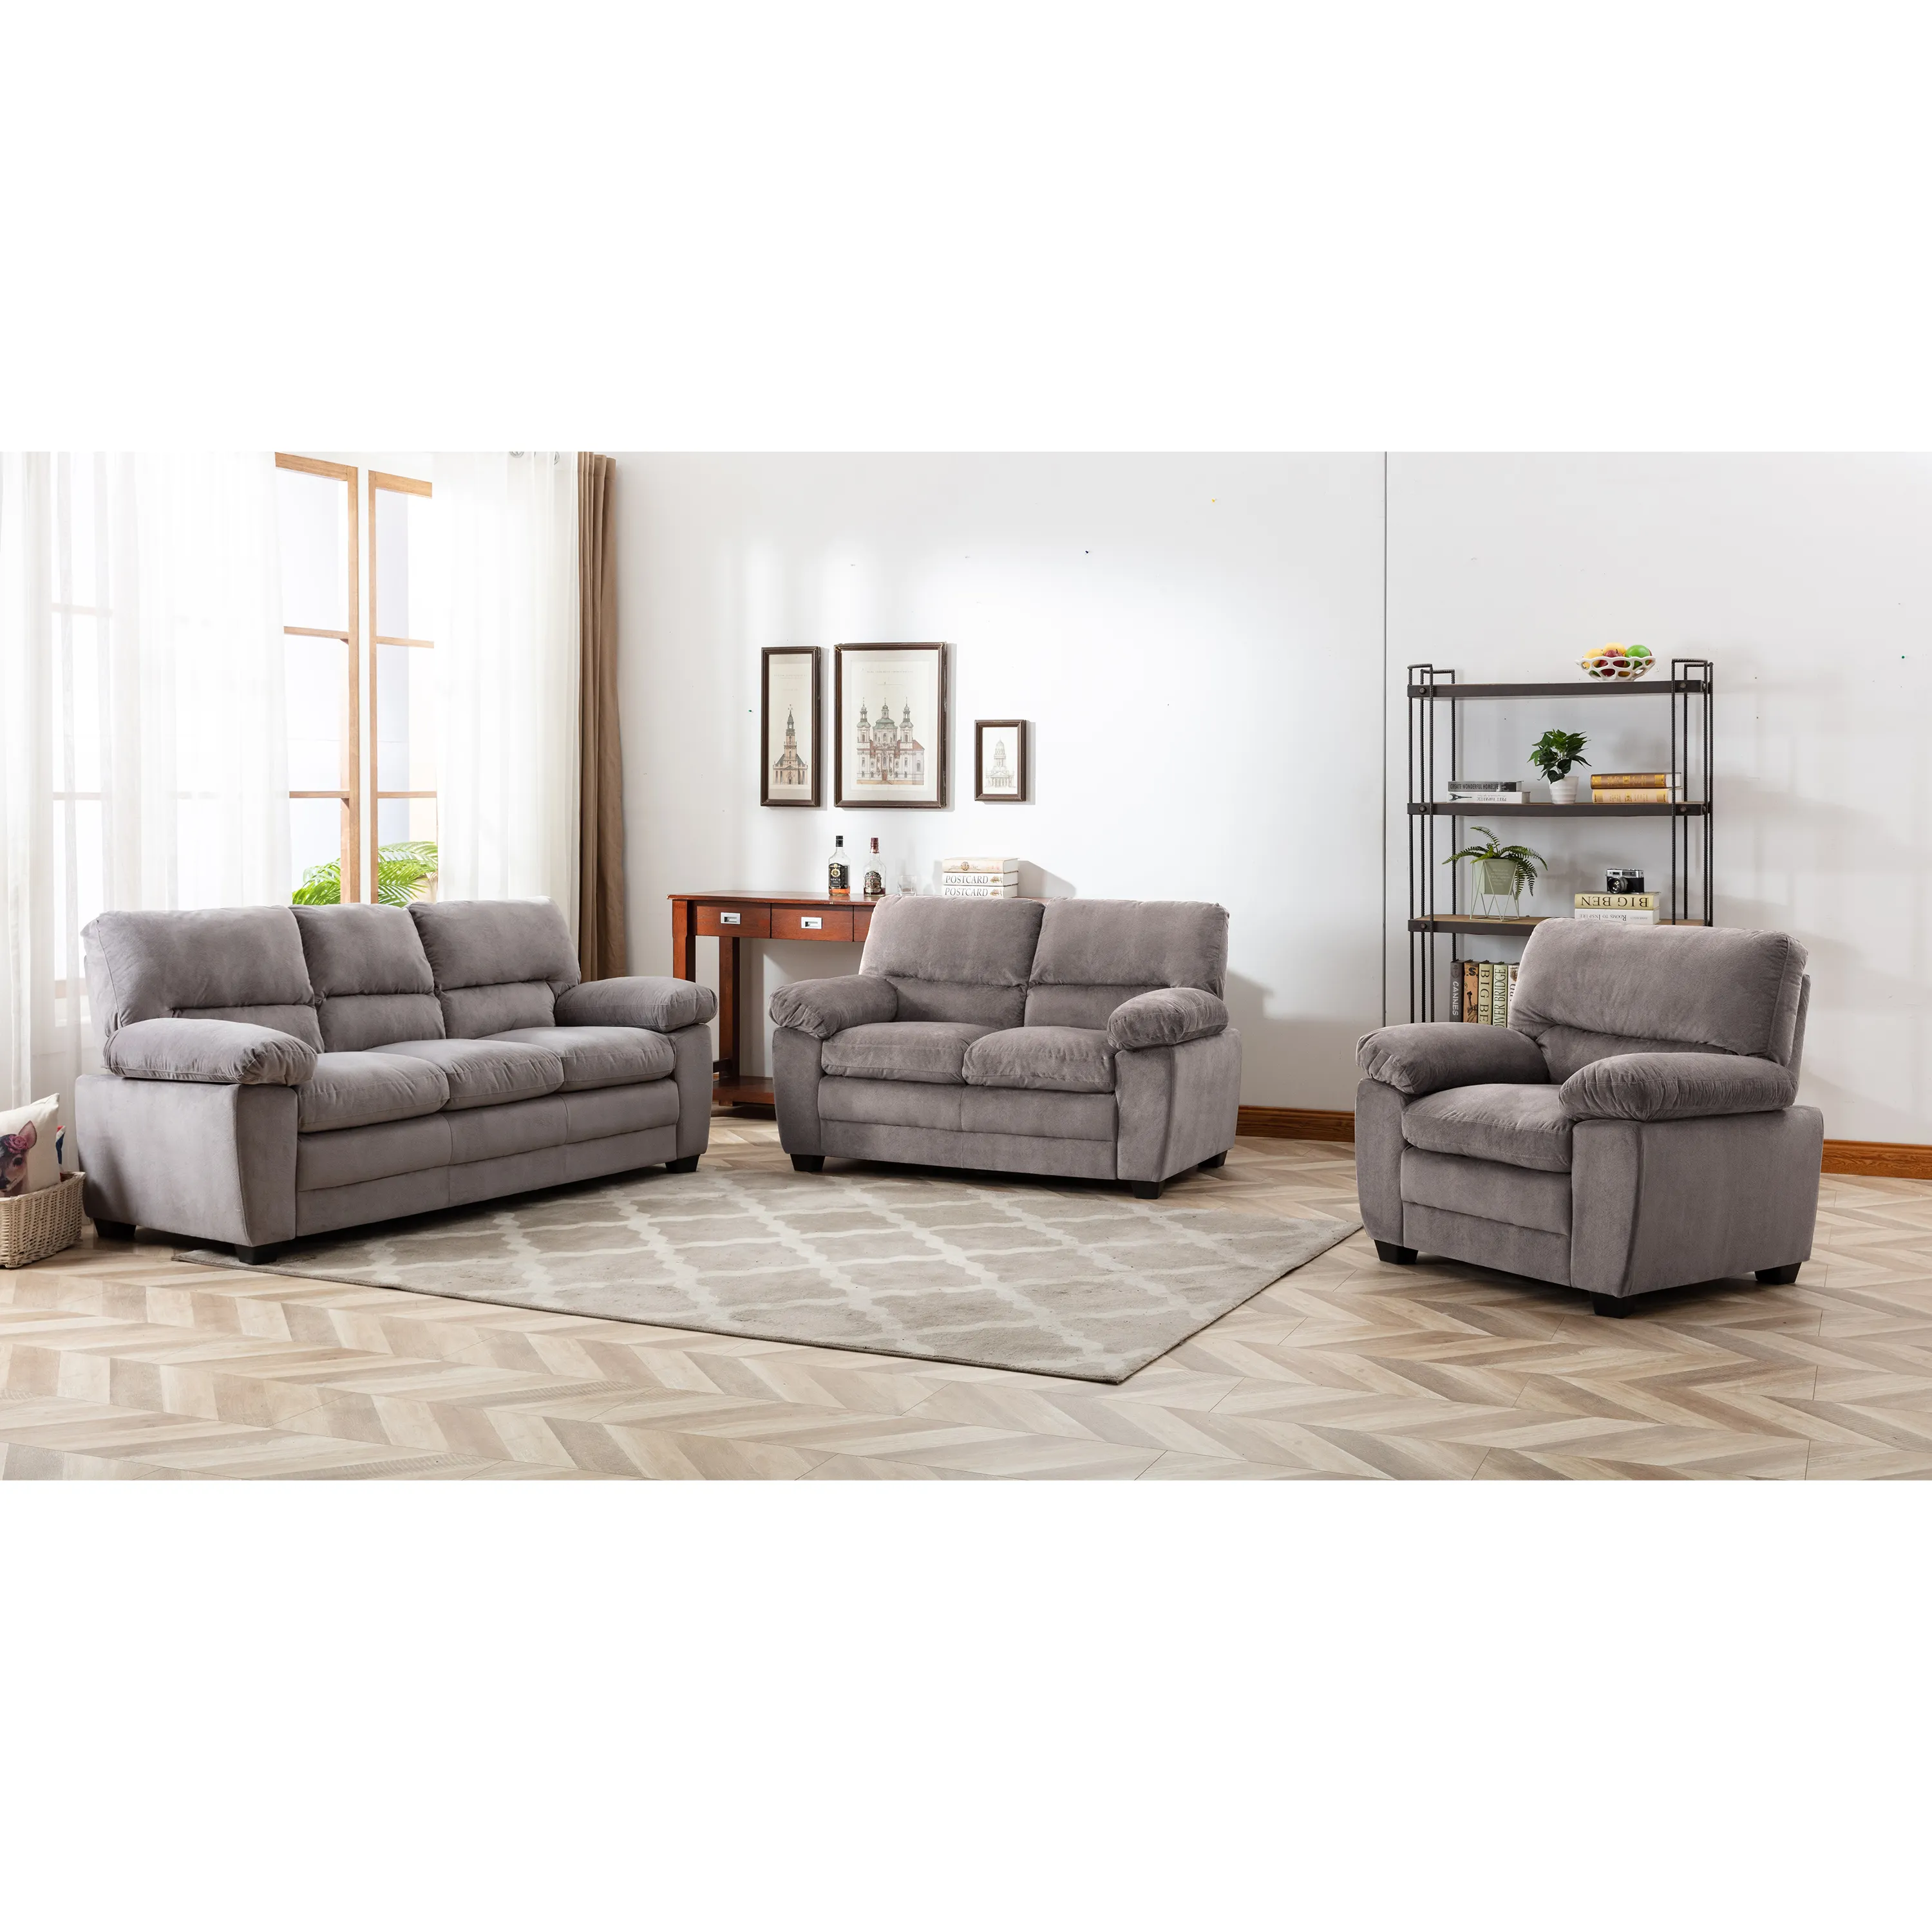 Living Room Brown 3 Pieces Armchair Couch Double Sofas Set 6 Seat Chair Loveseat Sofa Sectional Furniture for Hotel